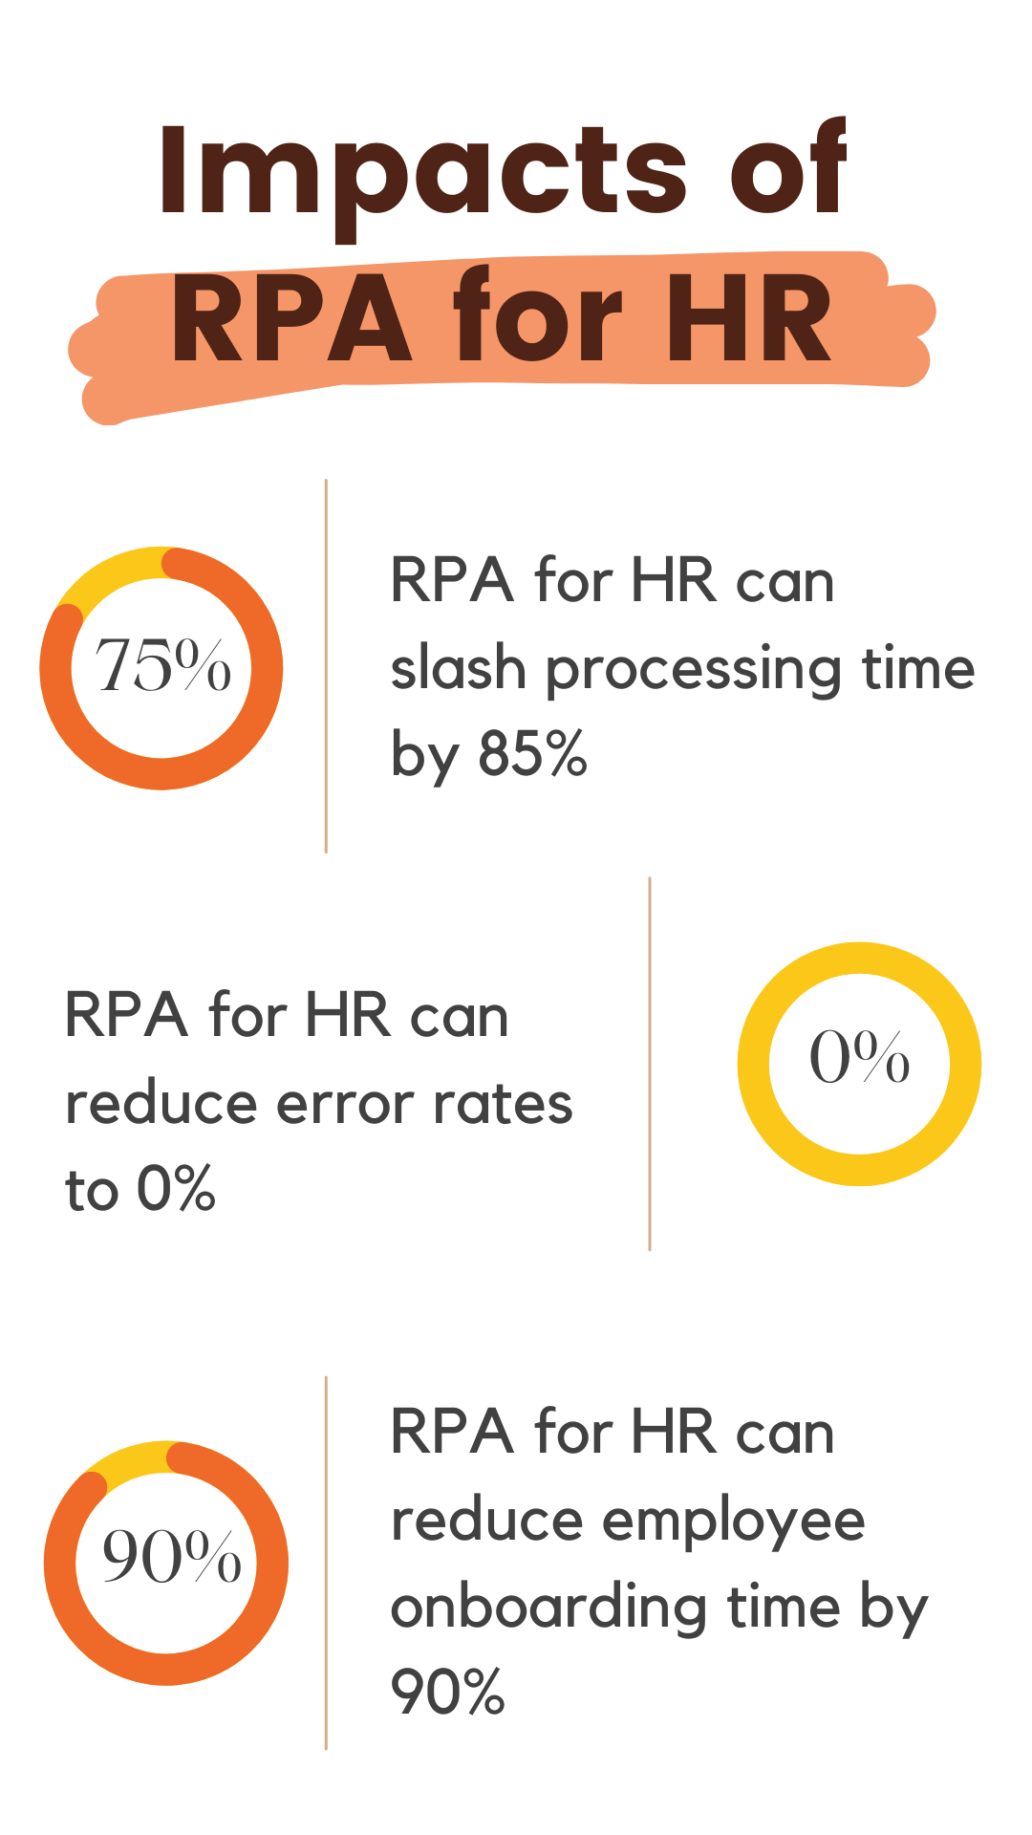 rpa for hr